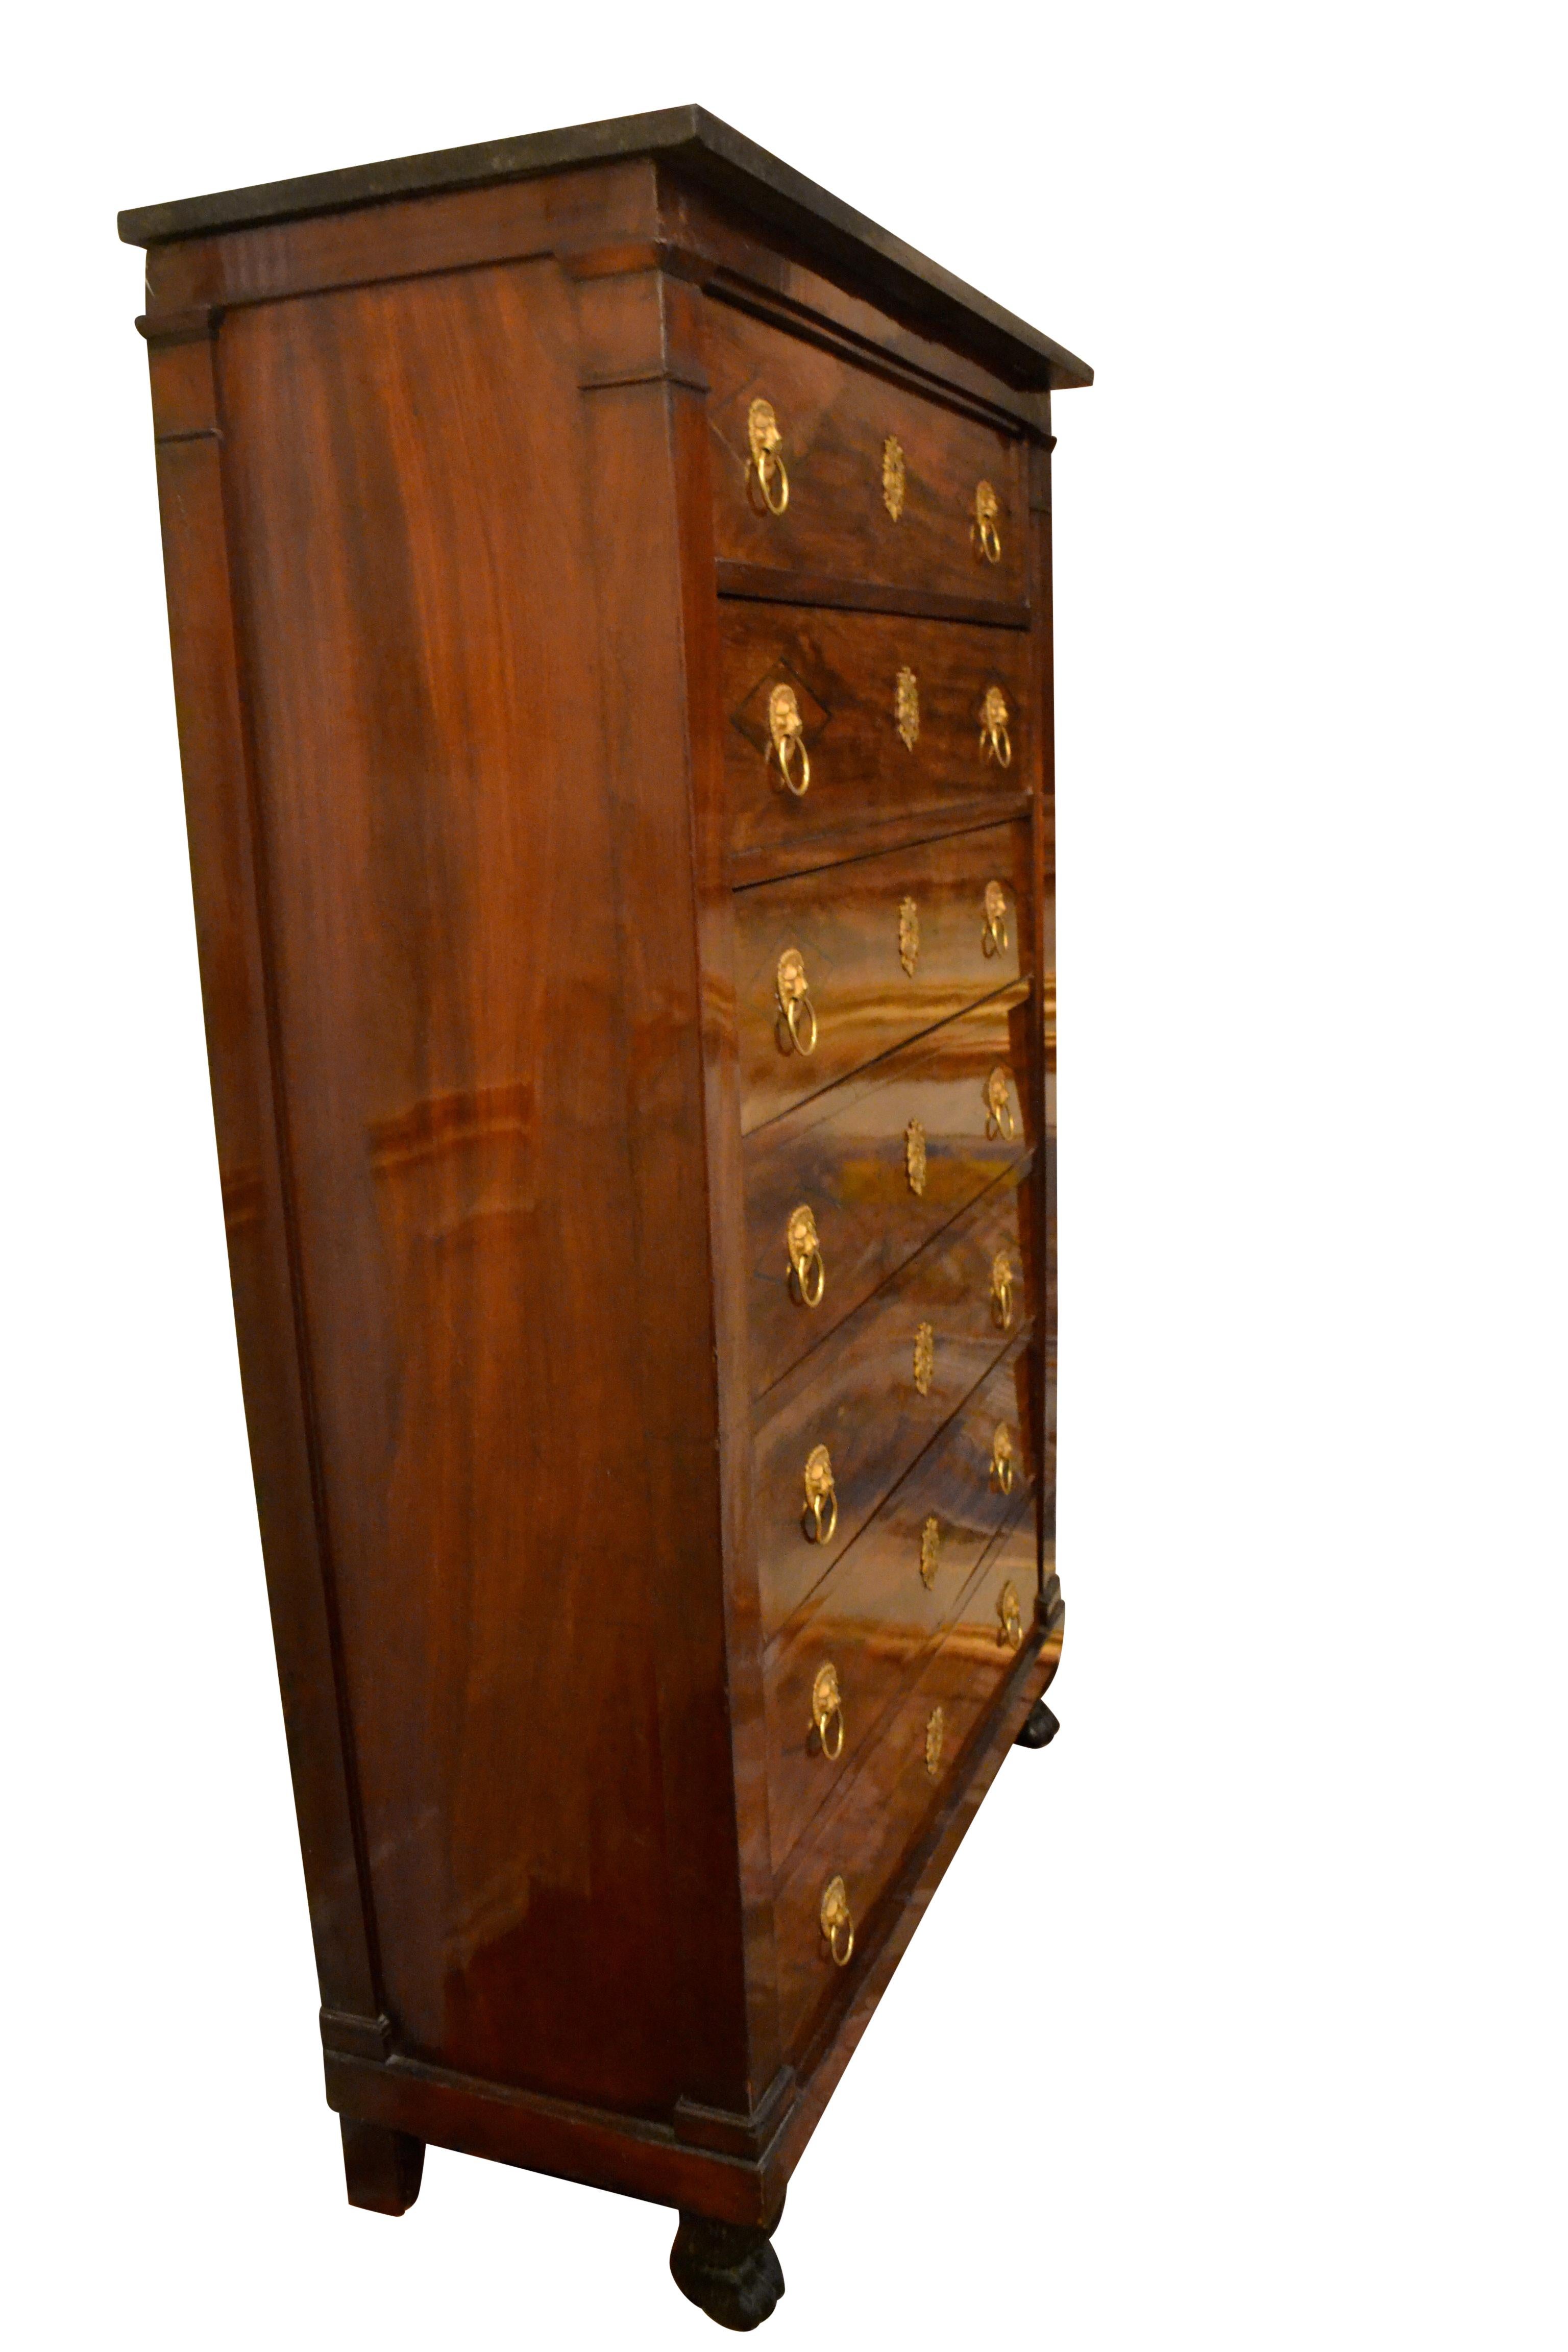 French Empire Semainier Tall Chest of Drawers  In Good Condition For Sale In Vancouver, British Columbia